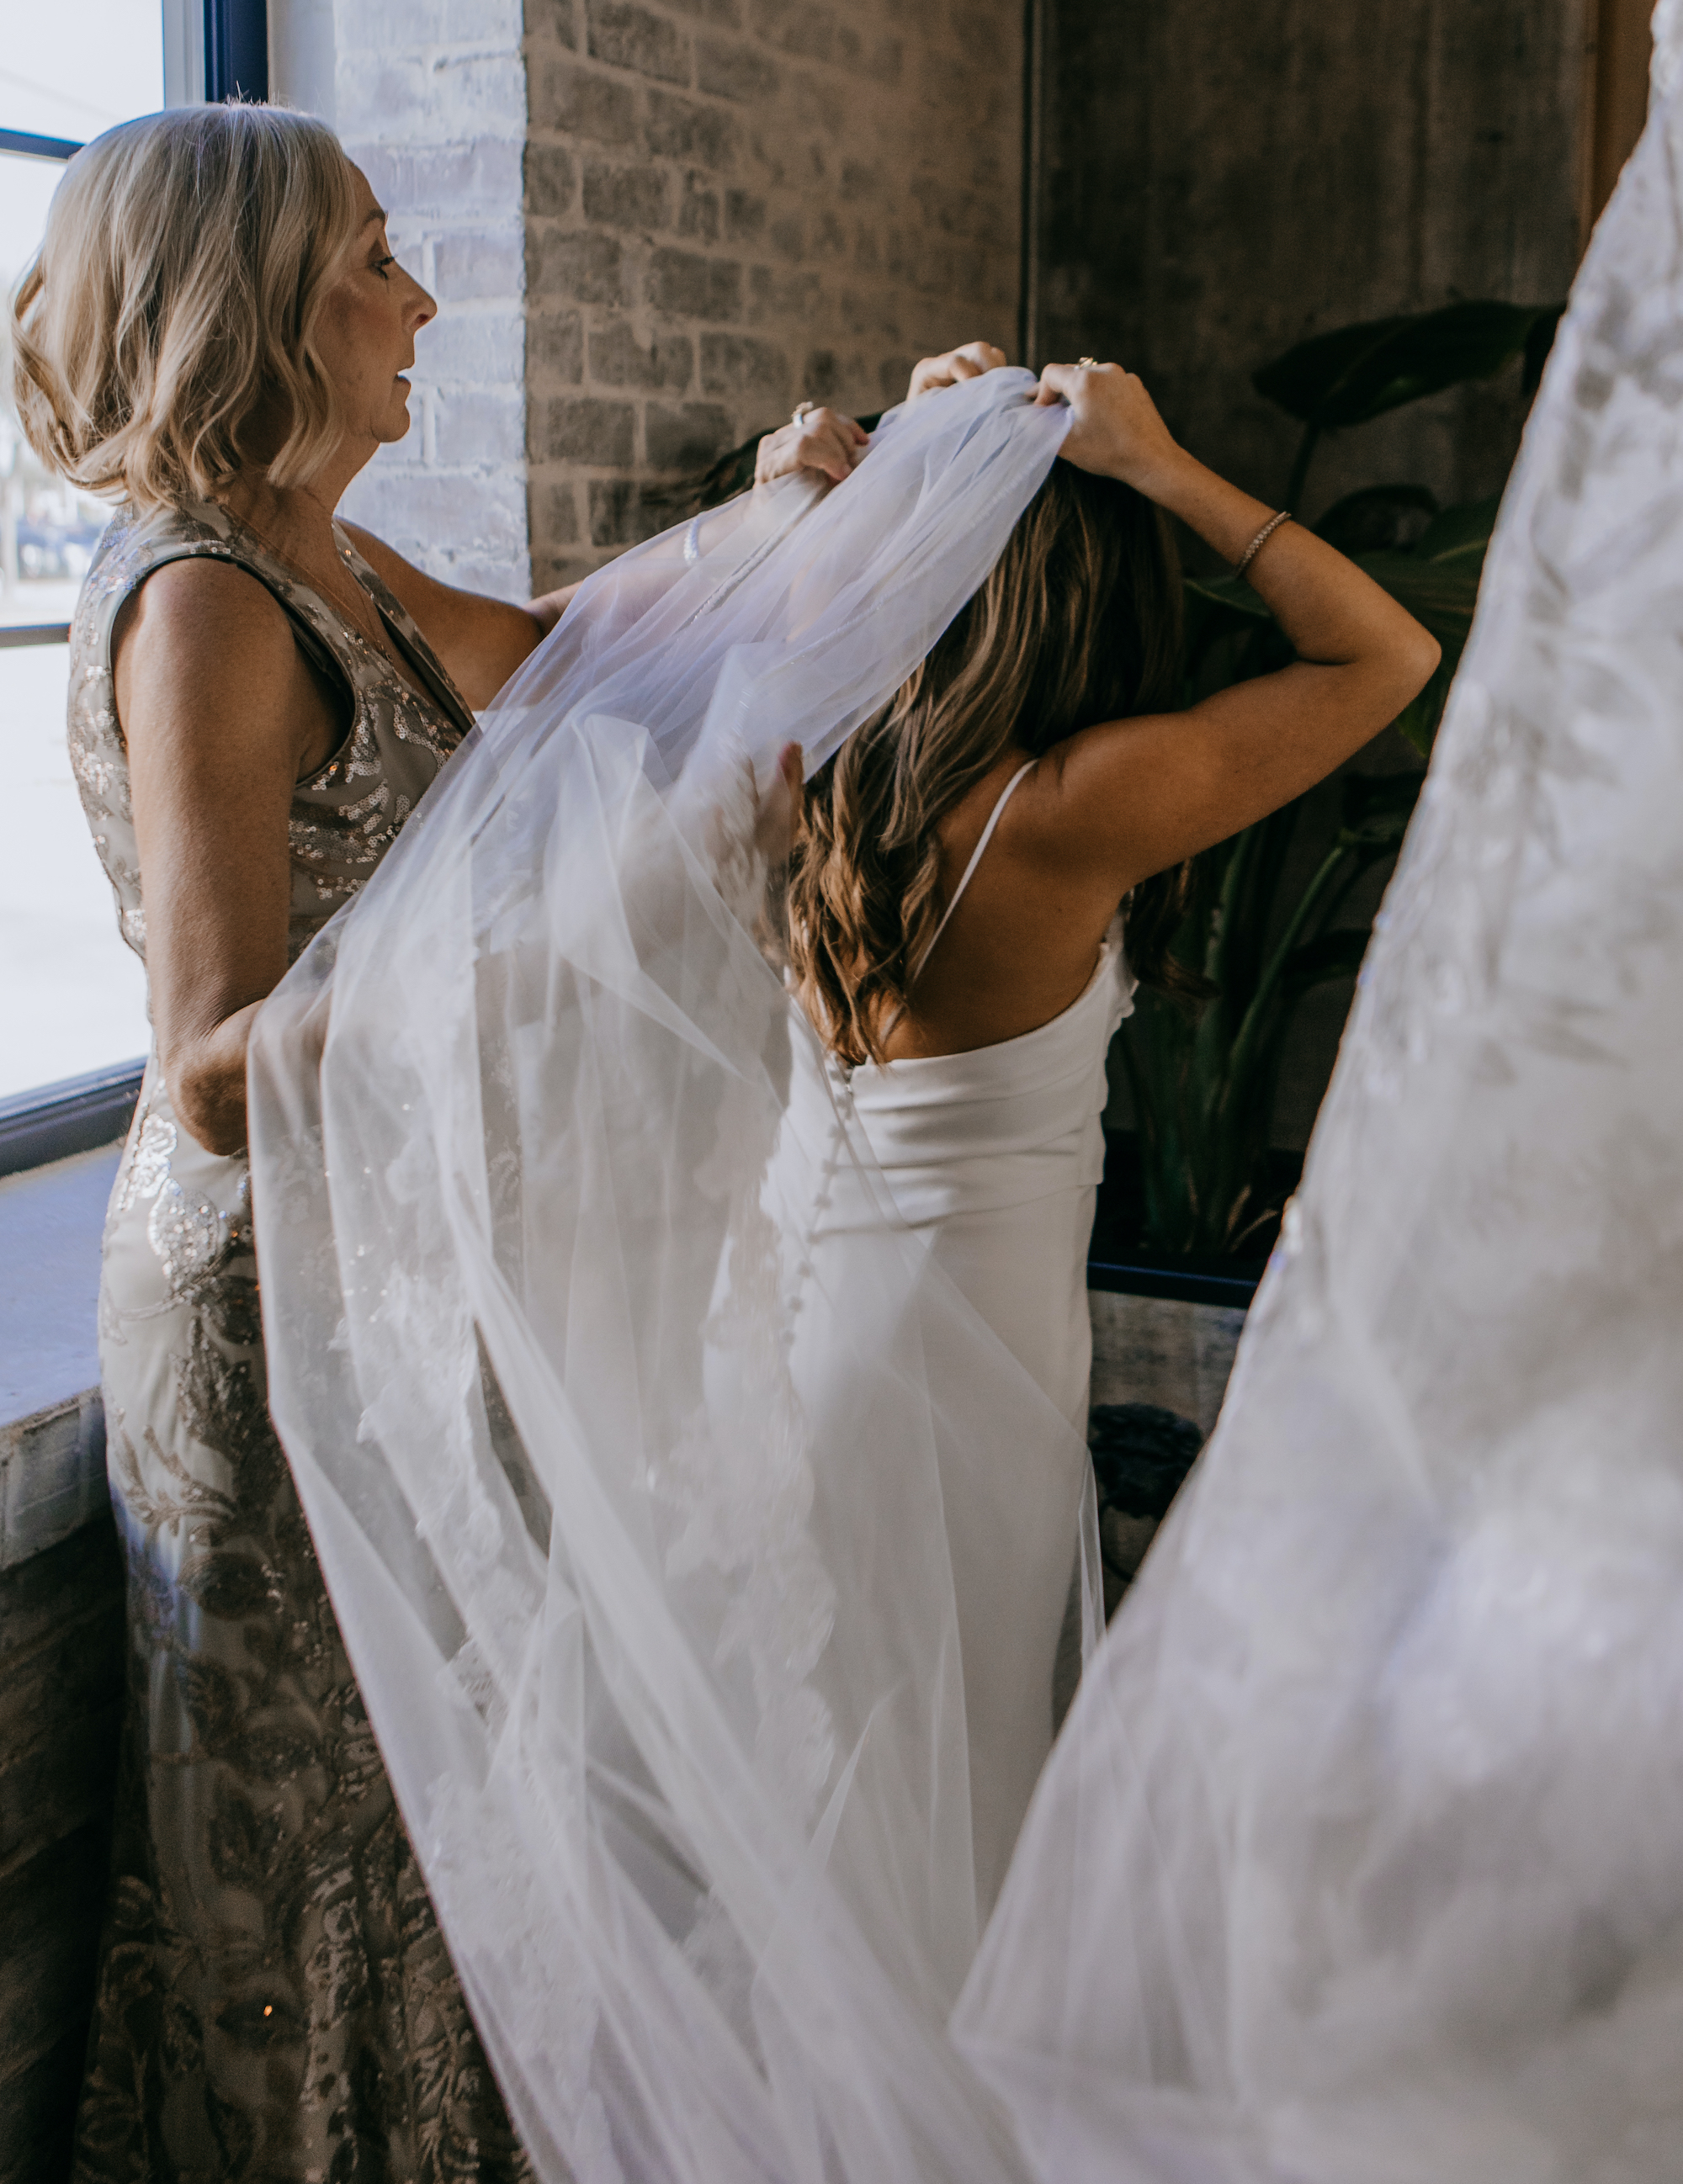 A bride's mom helps her put on her veil before her wedding at a venue in Houston, TX.